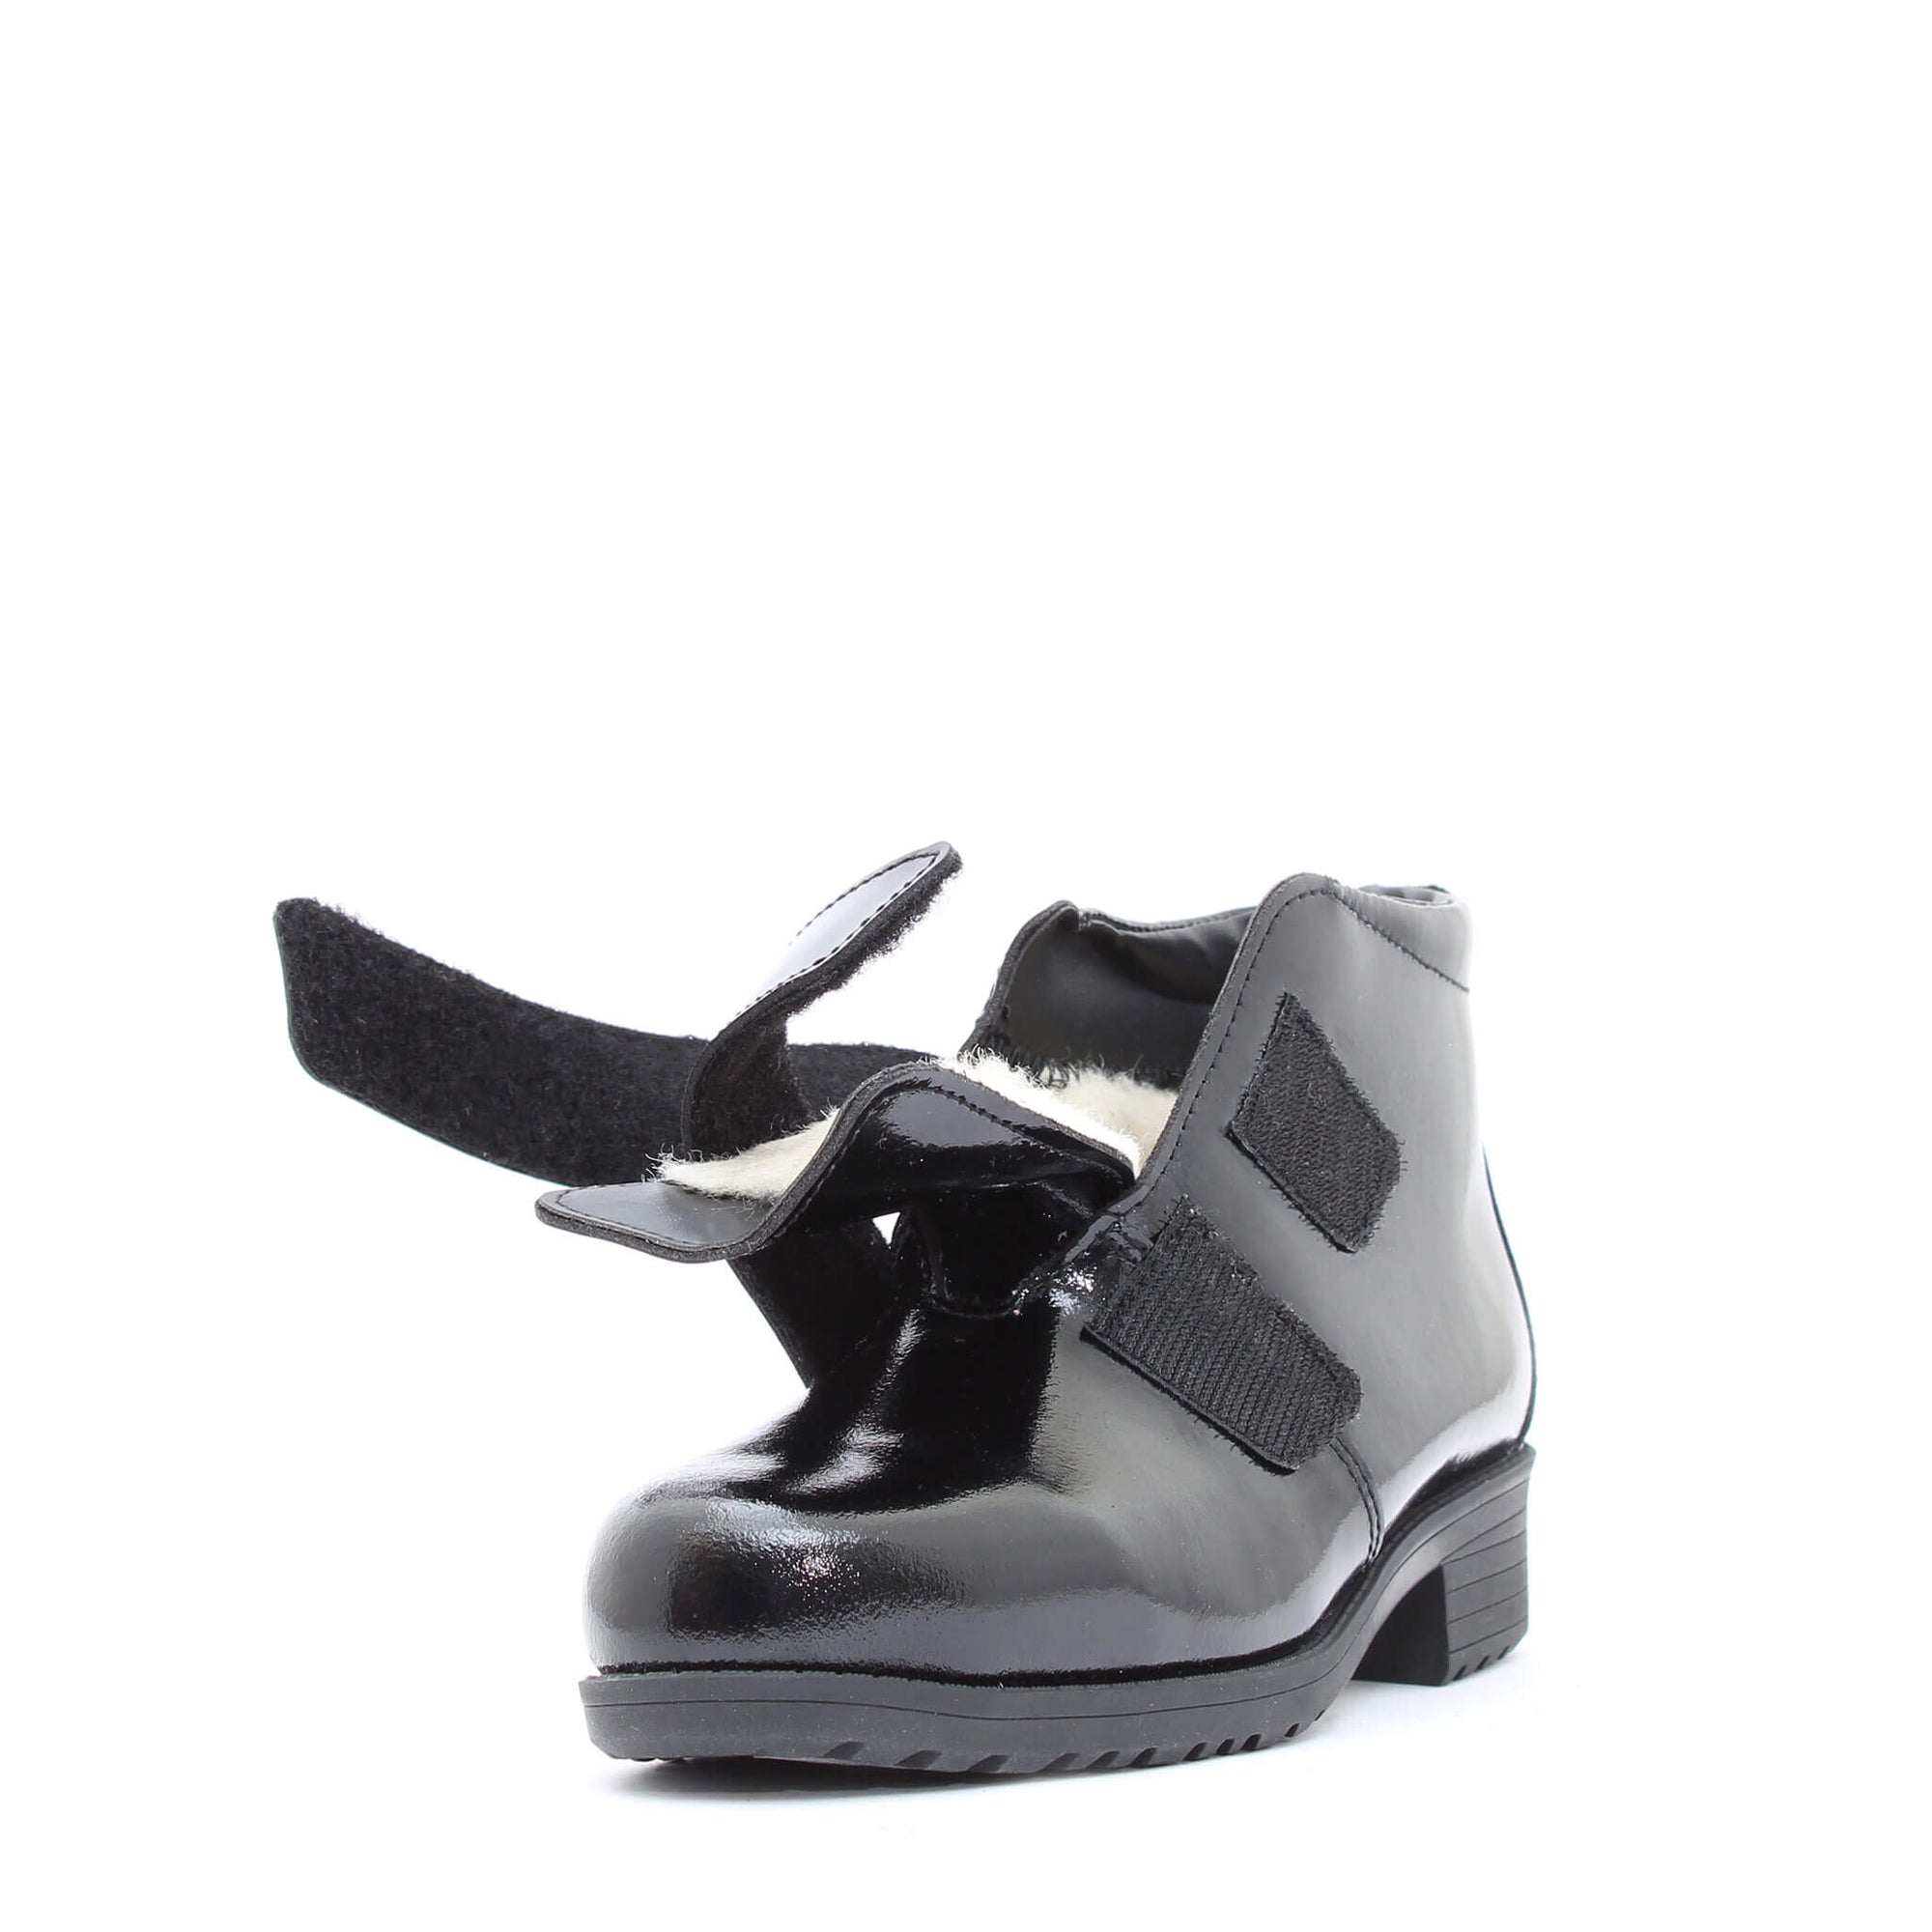 Polly winter boot for women - Black Patent 